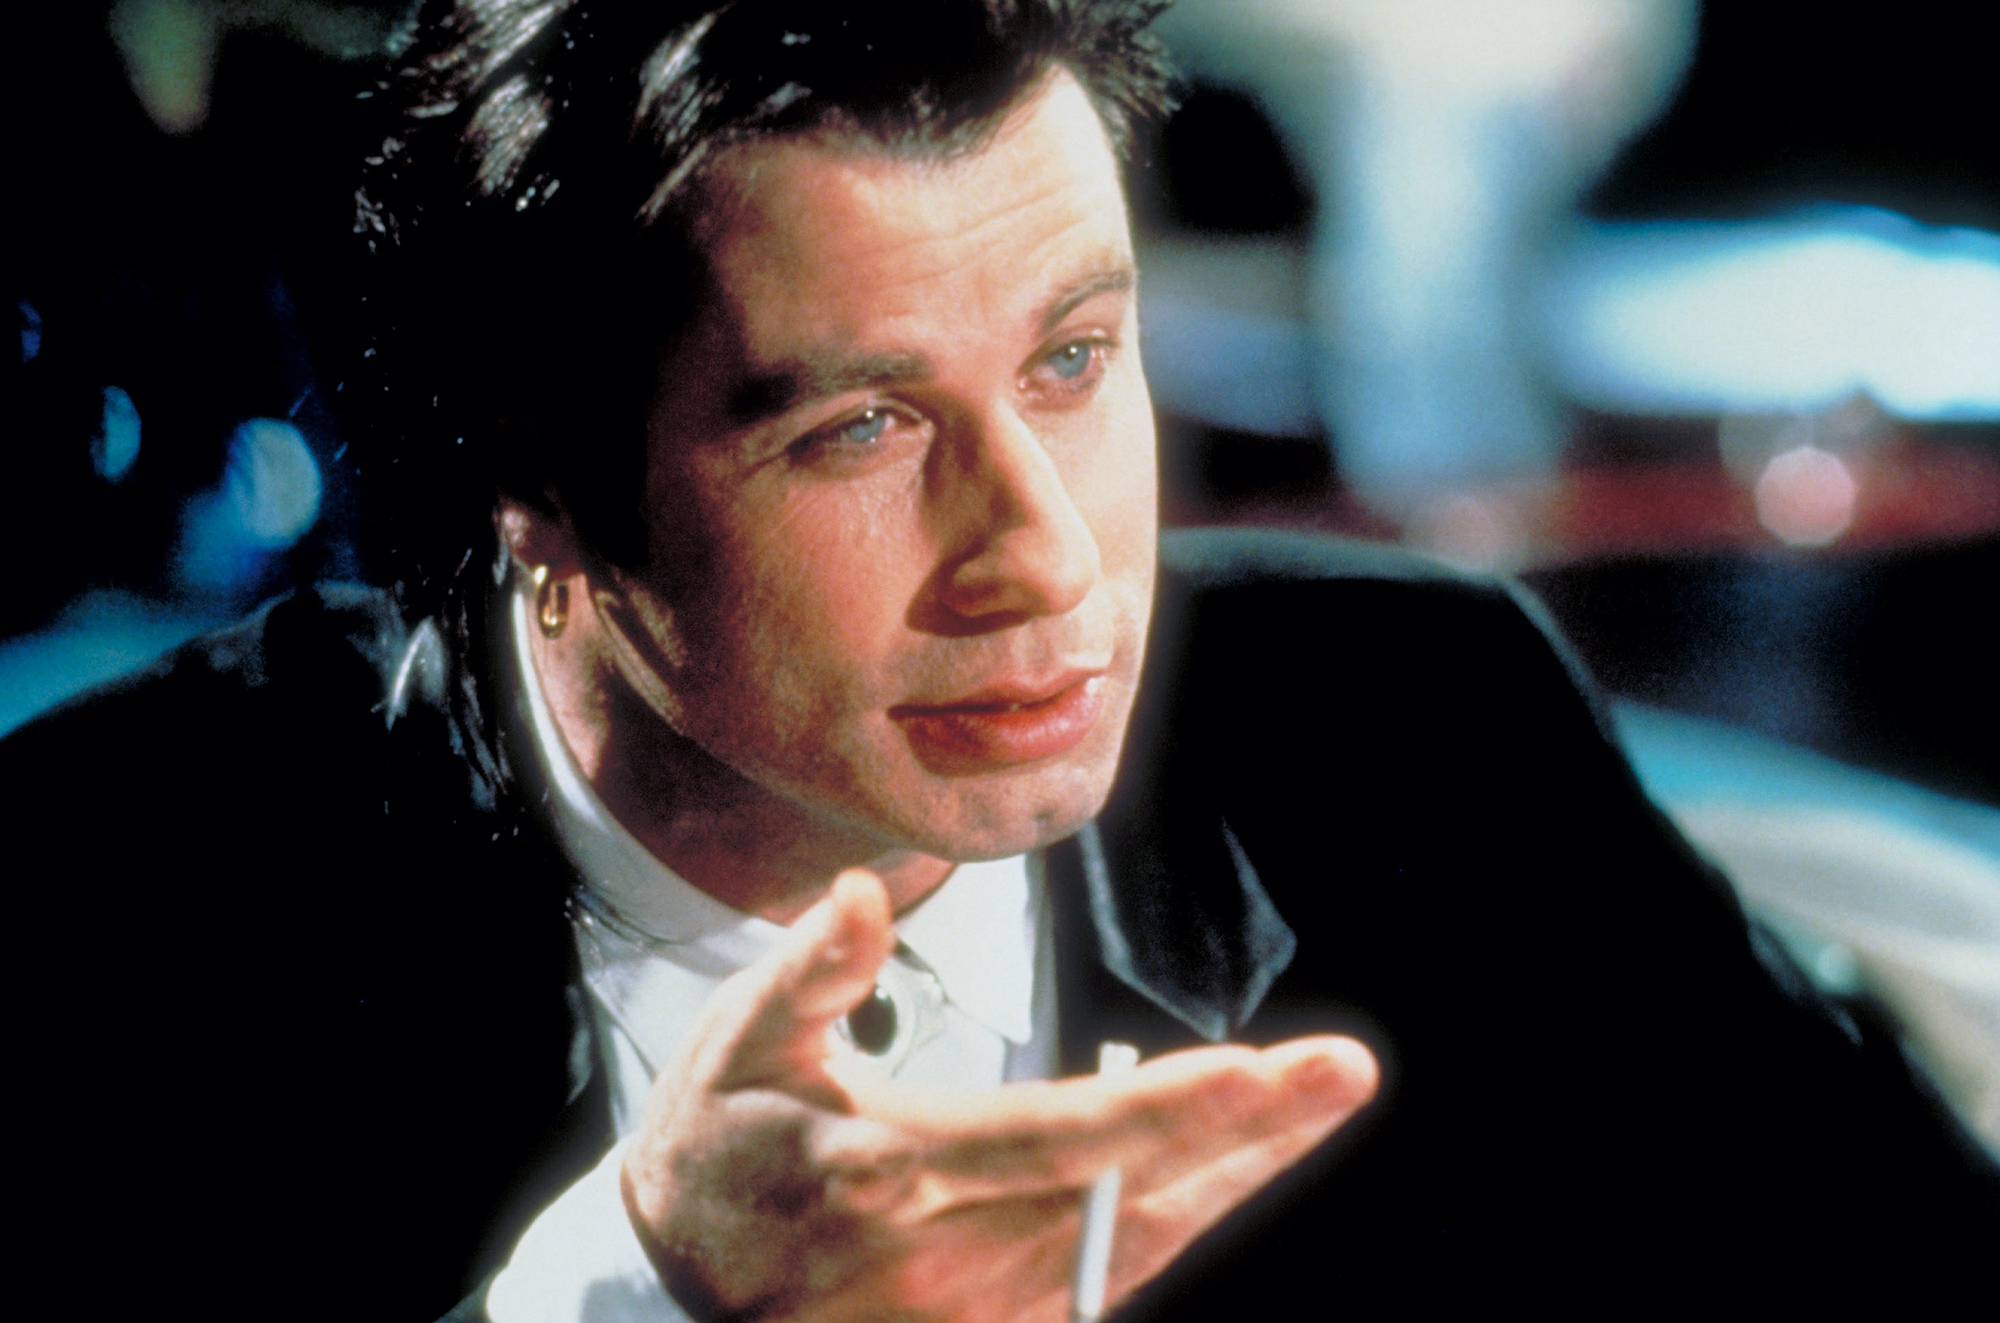 image from the 1994 movie "Pulp Fiction." it is an extreme closeup of John Travolta as Vincent Vega, wearing a dark suit and holding a cigarette in his right hand as he talks to someone across from him.